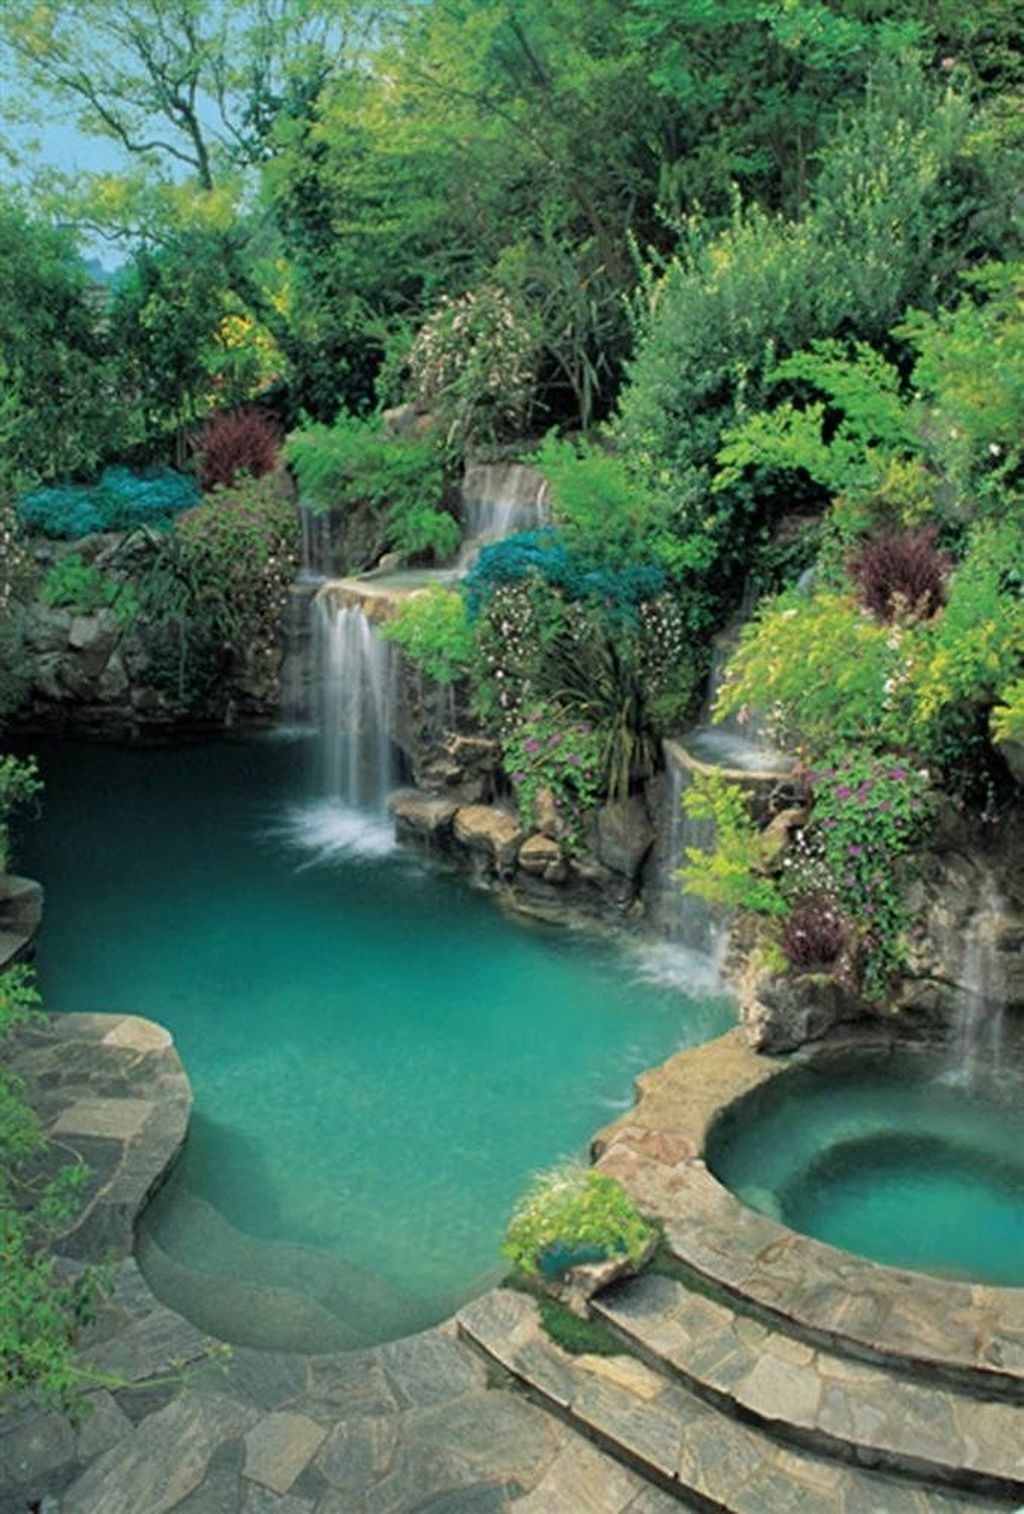 Amazing green water in garden hot tubs with the main